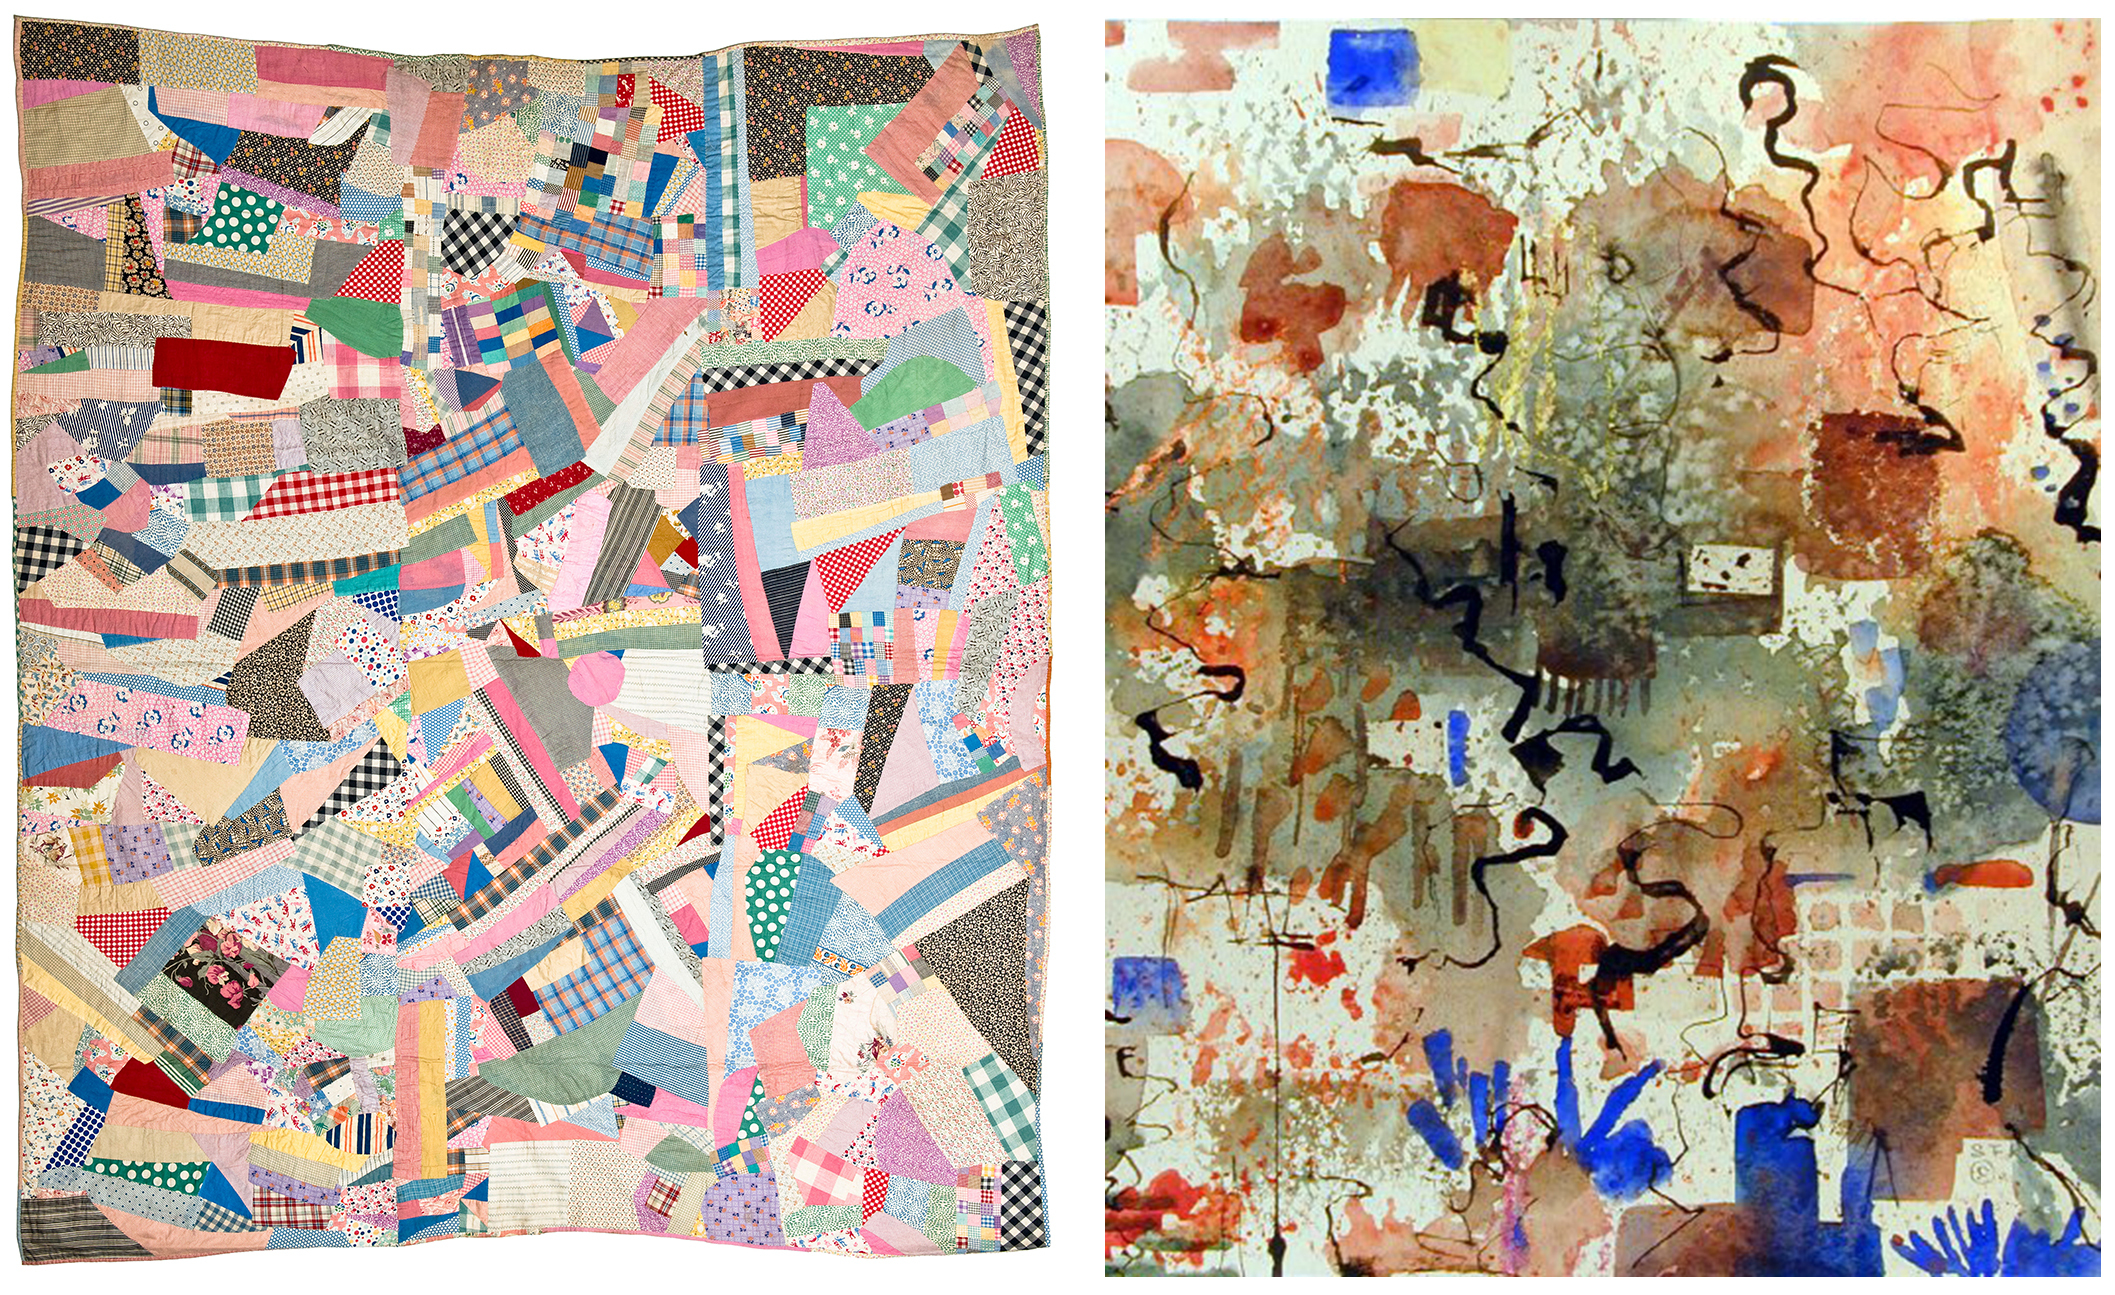 (left) Scrap Quilt, 1934<br>(right) <i>Untitled</i>  (Abstract) by Sallie Frost Knerr, ca. 1970s